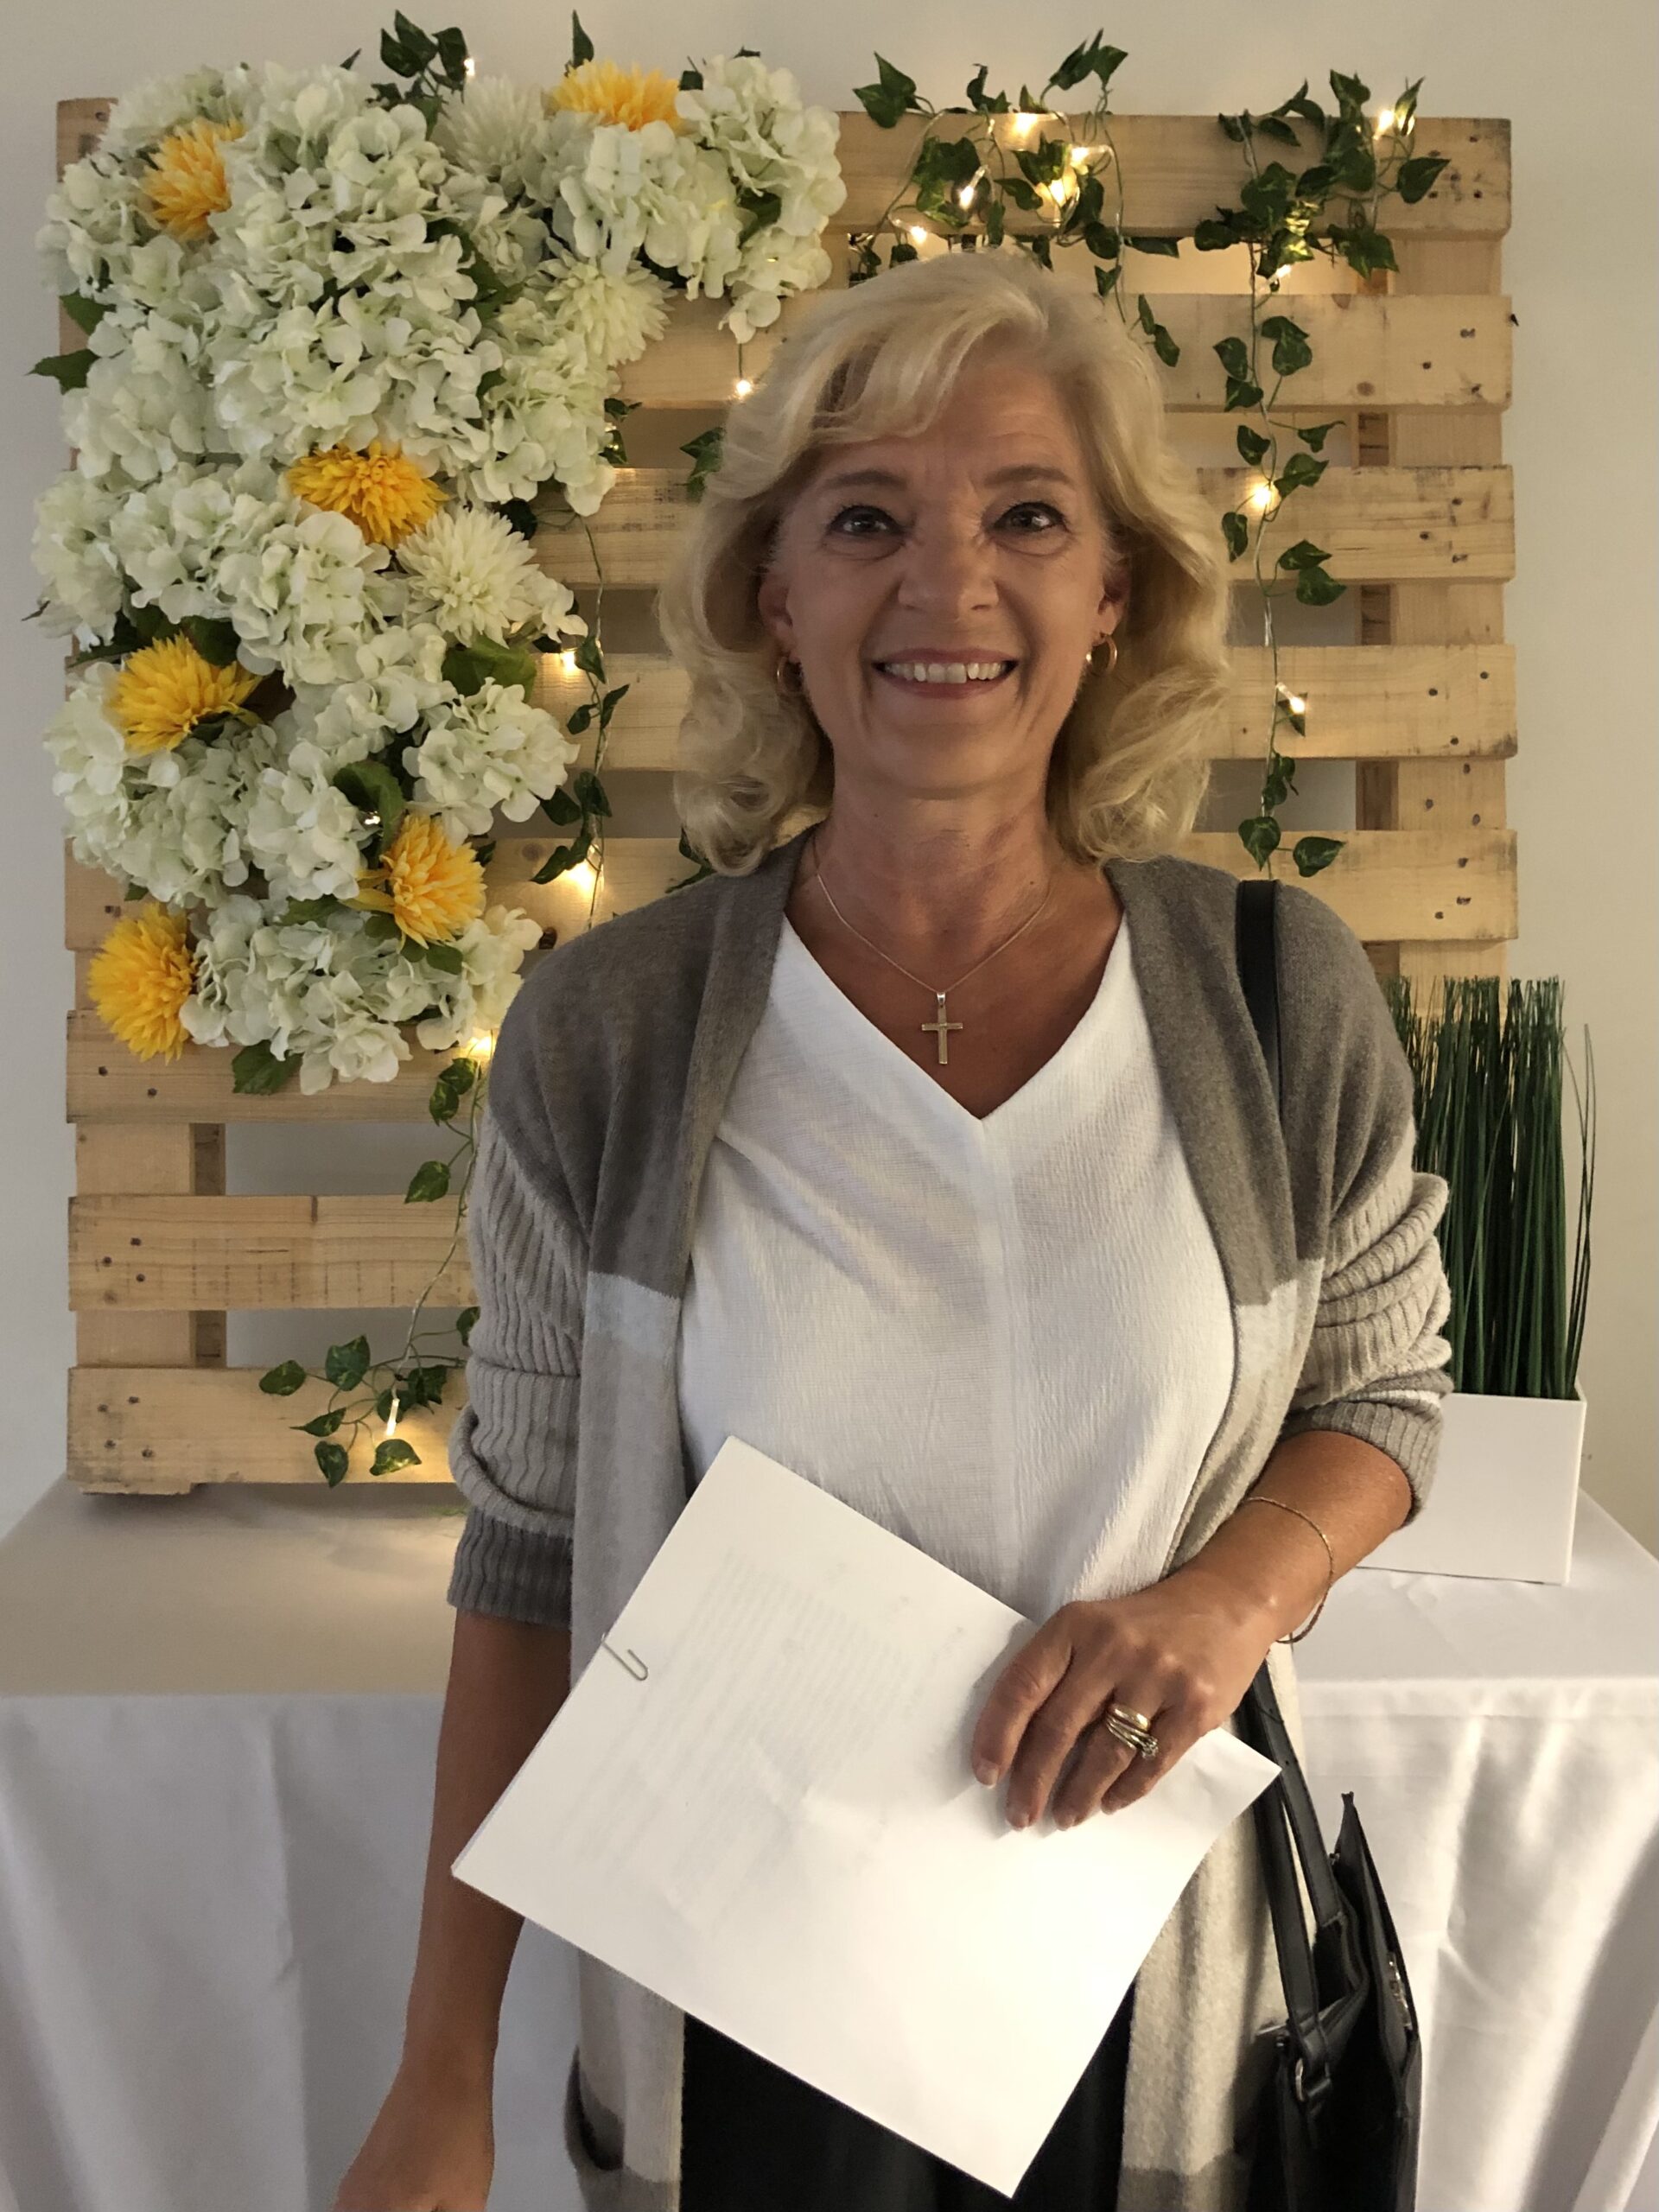 CWL- In-Person General Meeting September 2021 - Our guest speaker, Mrs. Lorraine Paruzzolo, spoke about
"Embracing Trust"